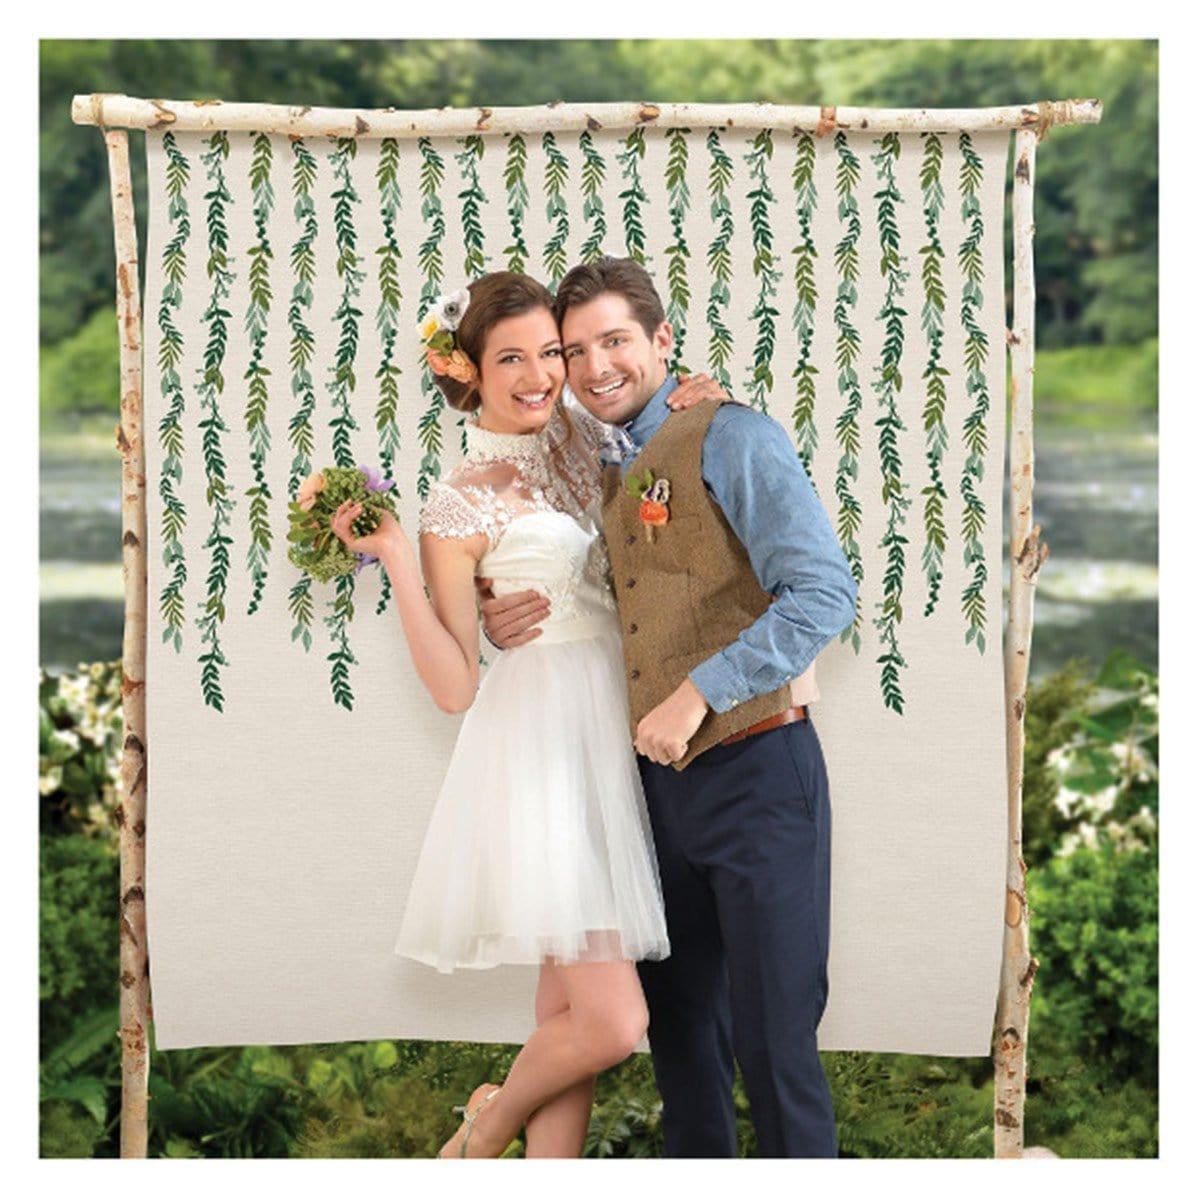 Buy Wedding Love & Leaves - Backdrop sold at Party Expert